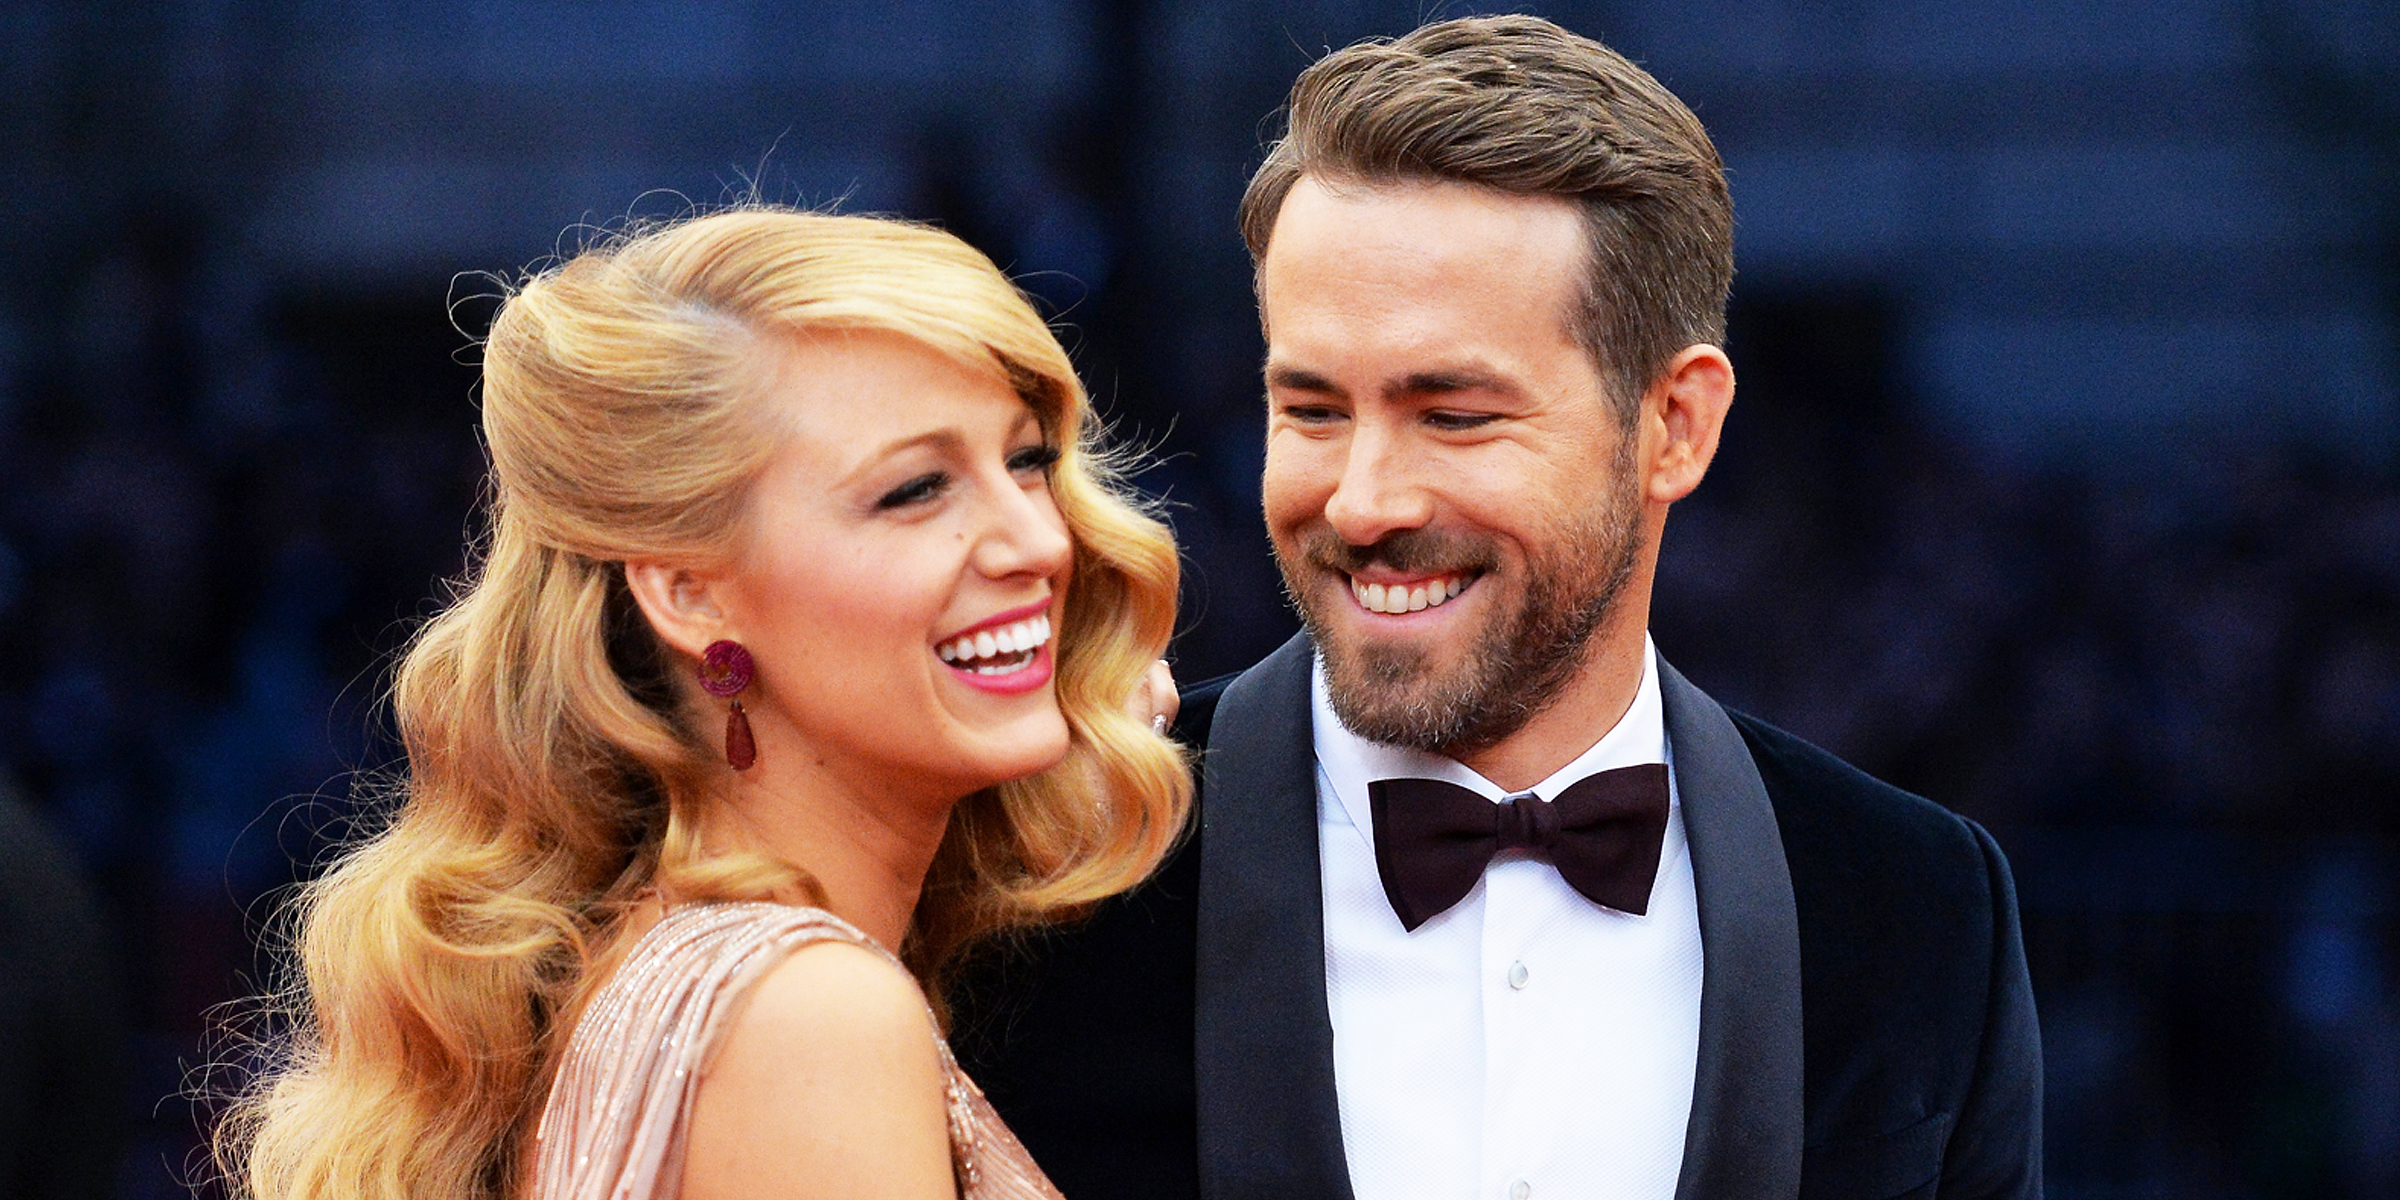 Blake Lively and Ryan Reynolds | Source: Getty Images